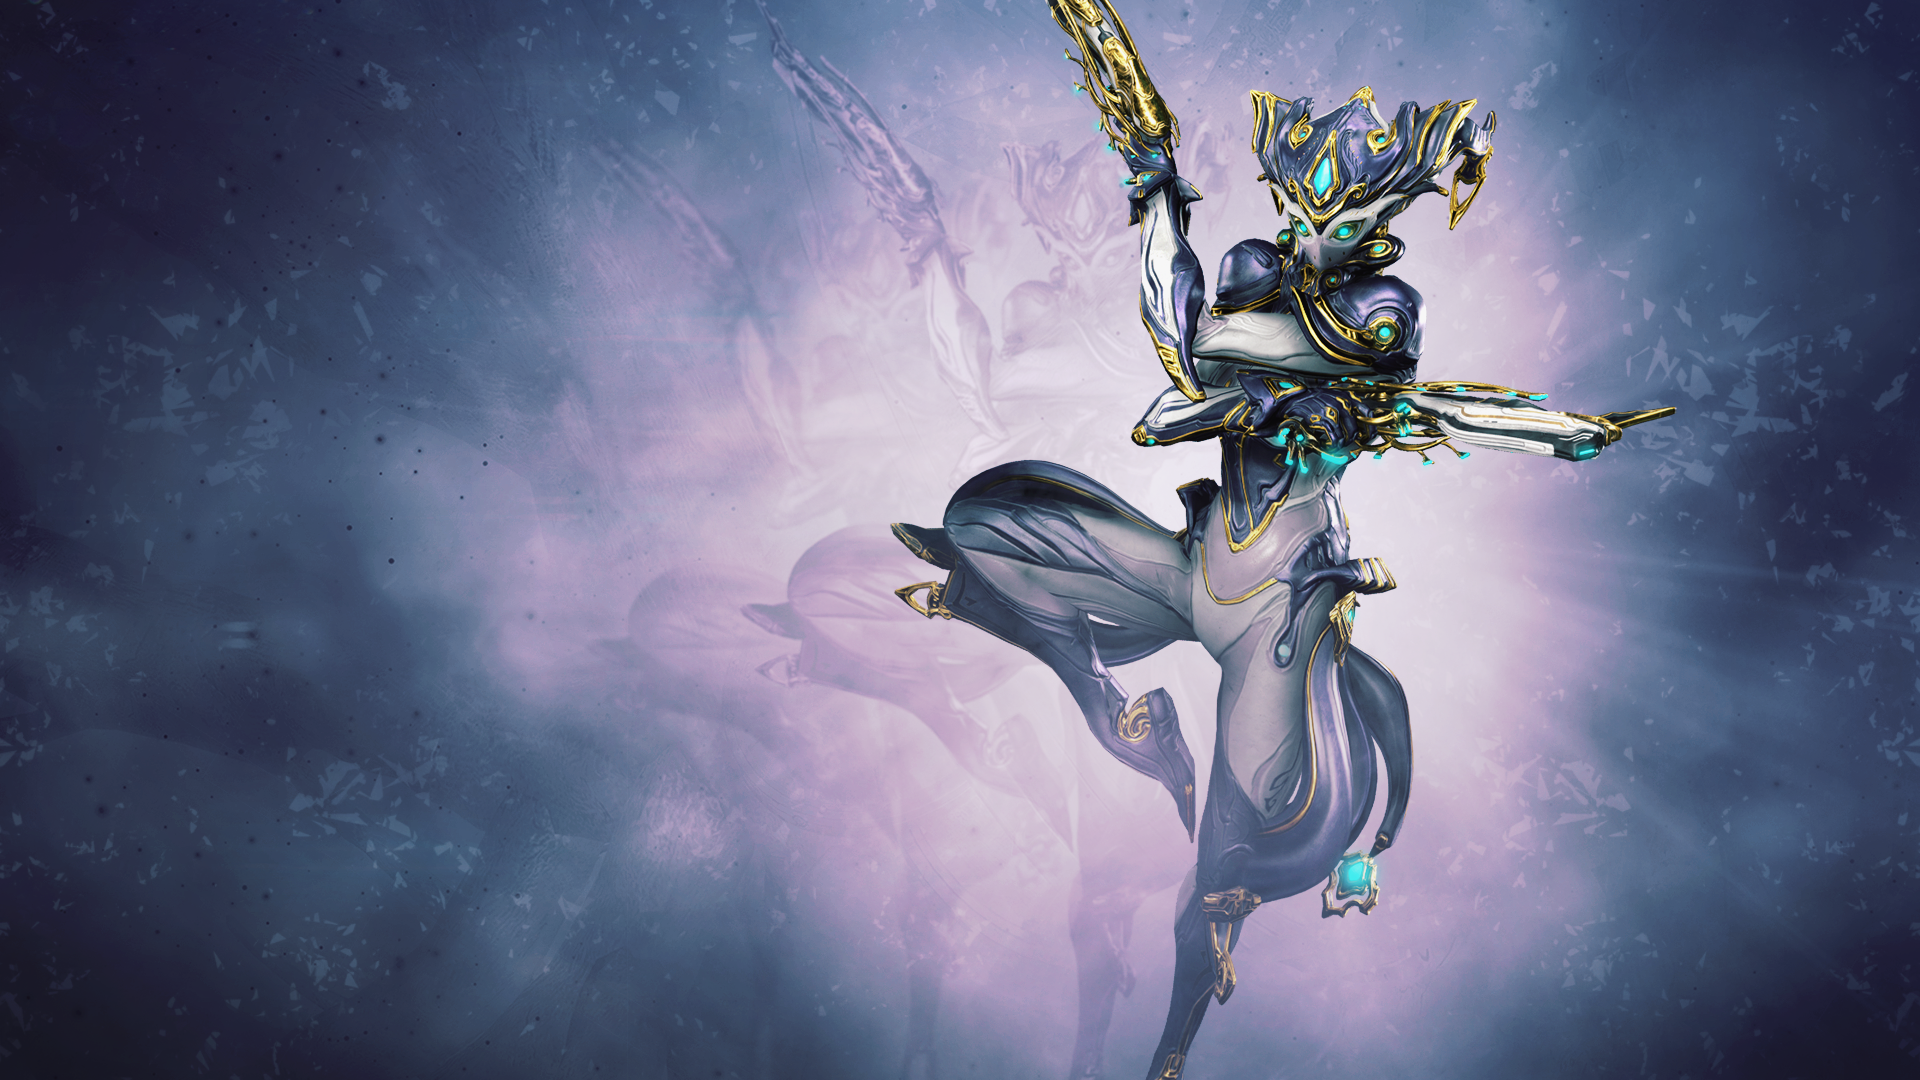 Warframe Banshee And Mirage Prime Vault Steam News Warriors armed with steel and magic bring violence and death as they do battle across a. warframe banshee and mirage prime